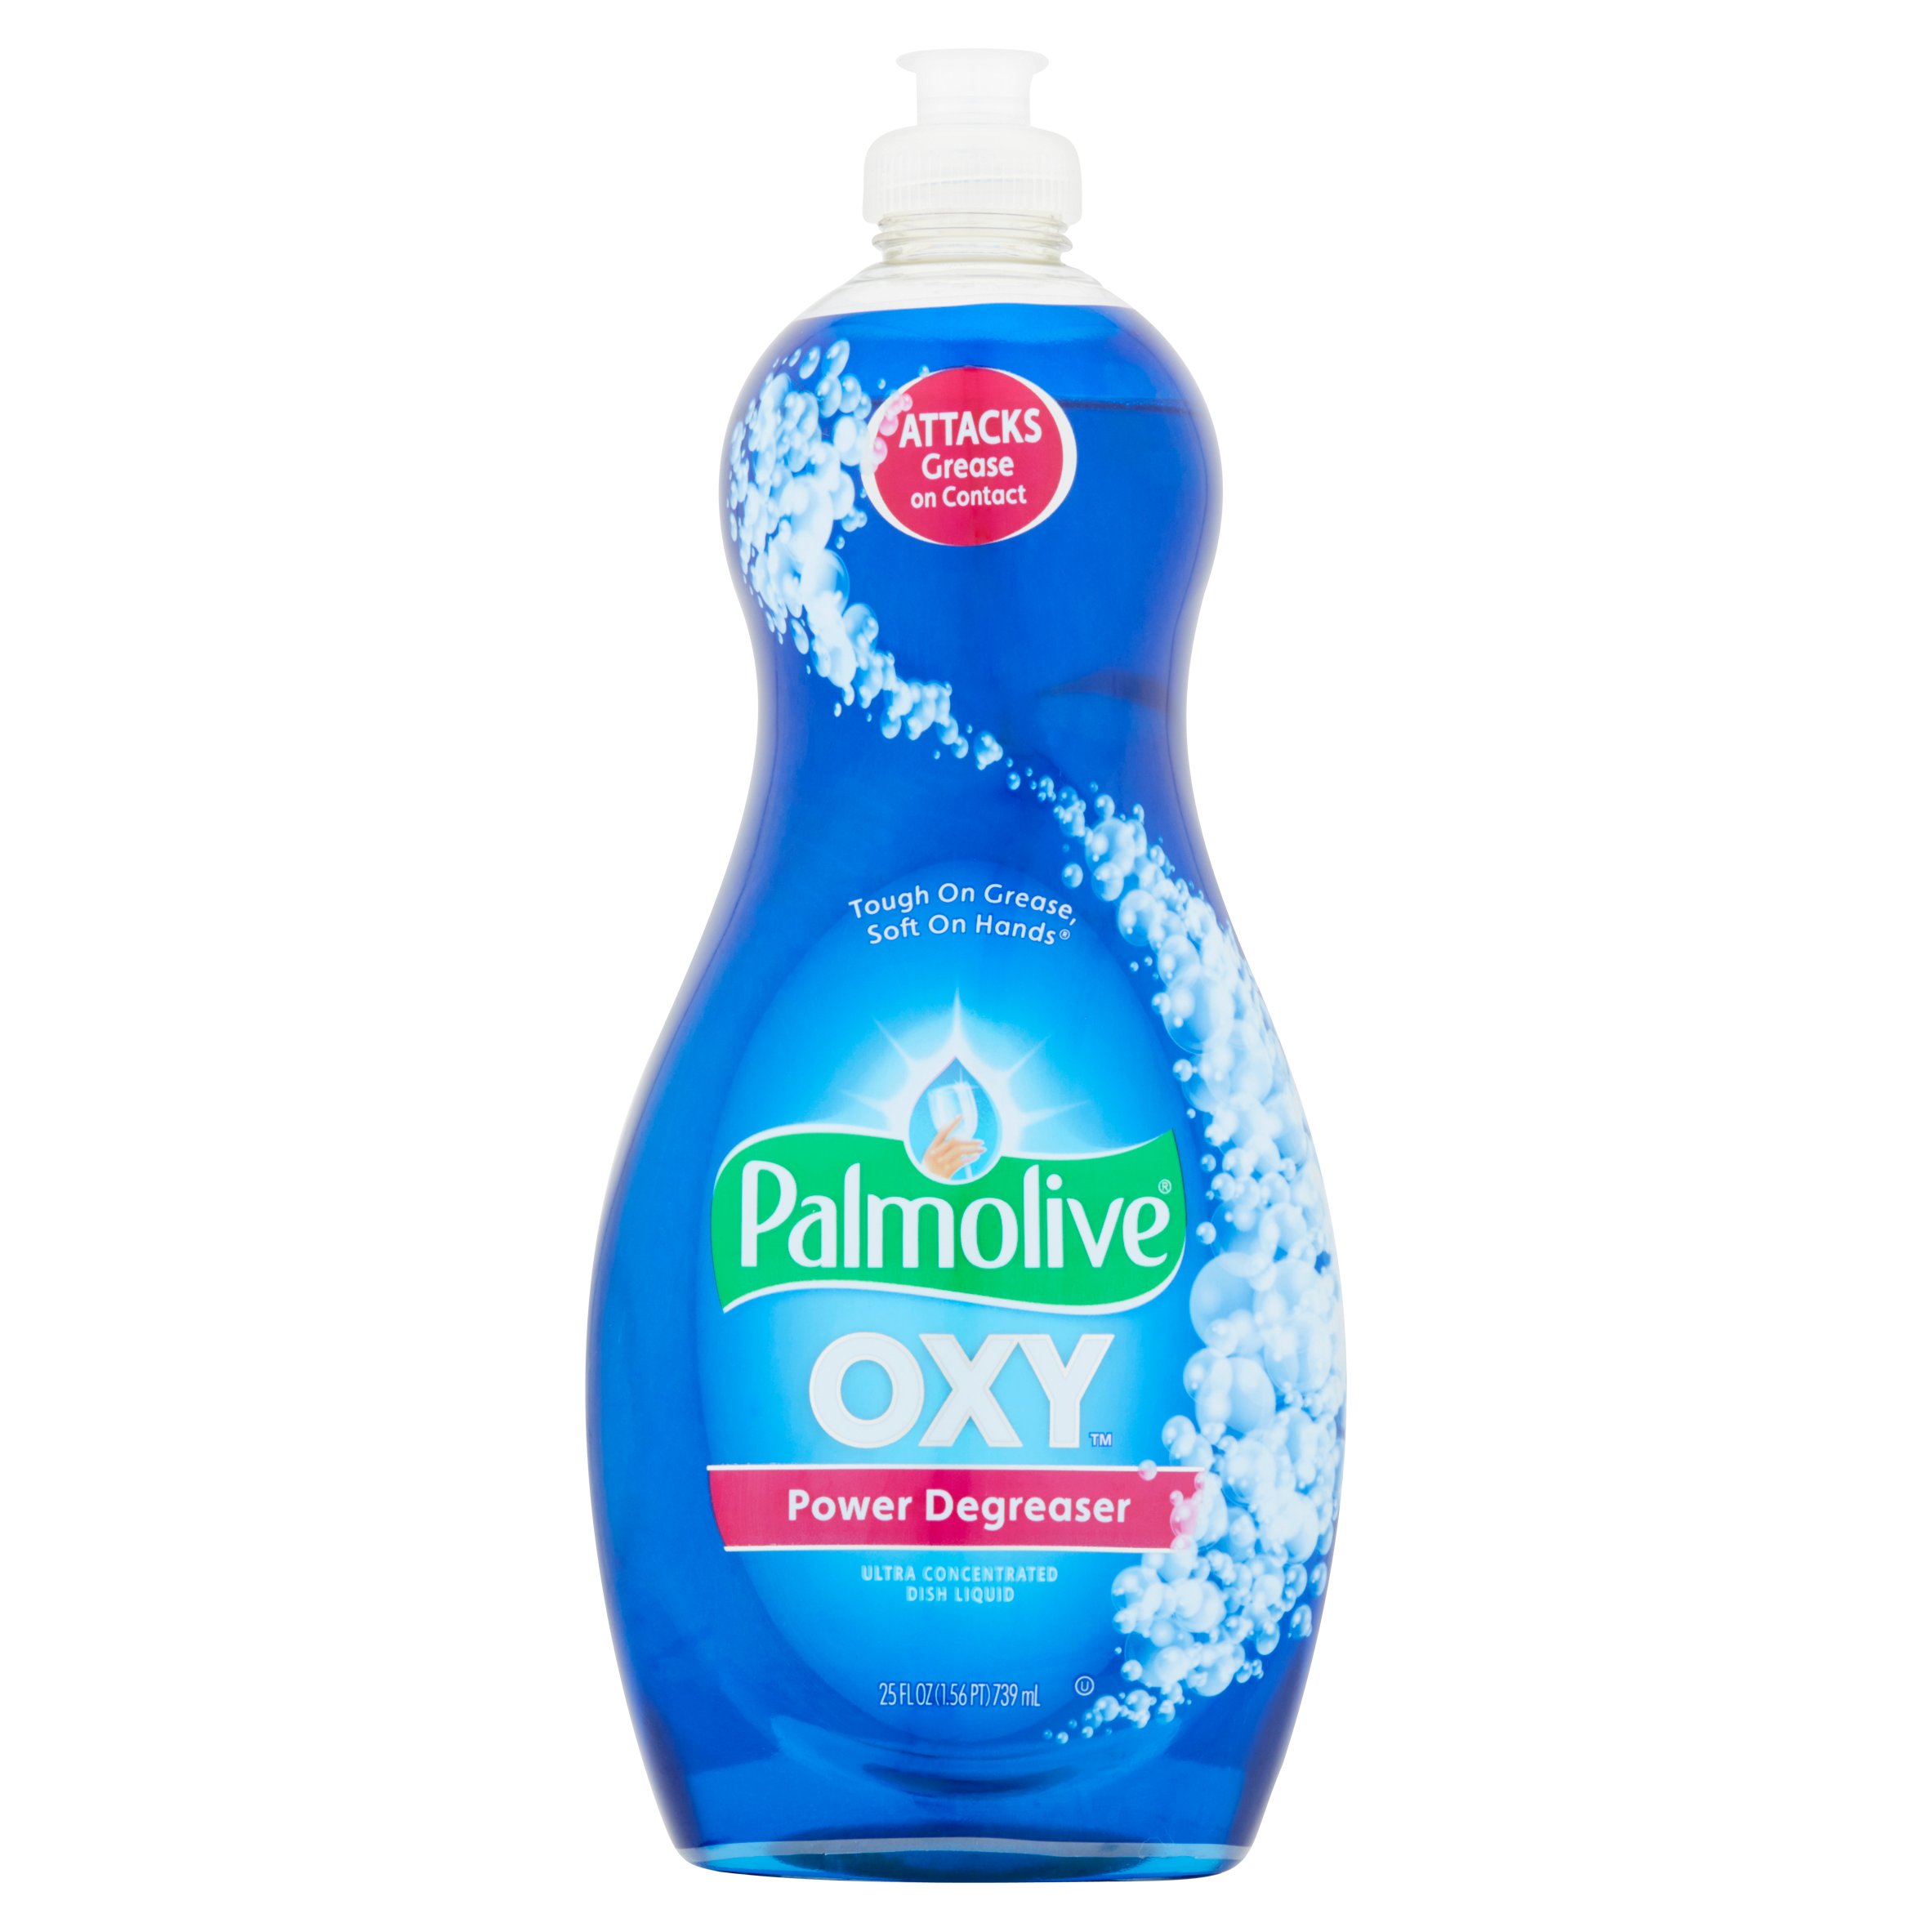 Palmolive Oxy Power Degreaser Ultra Concentrated Dish Liquid, 25 fl oz - image 1 of 6